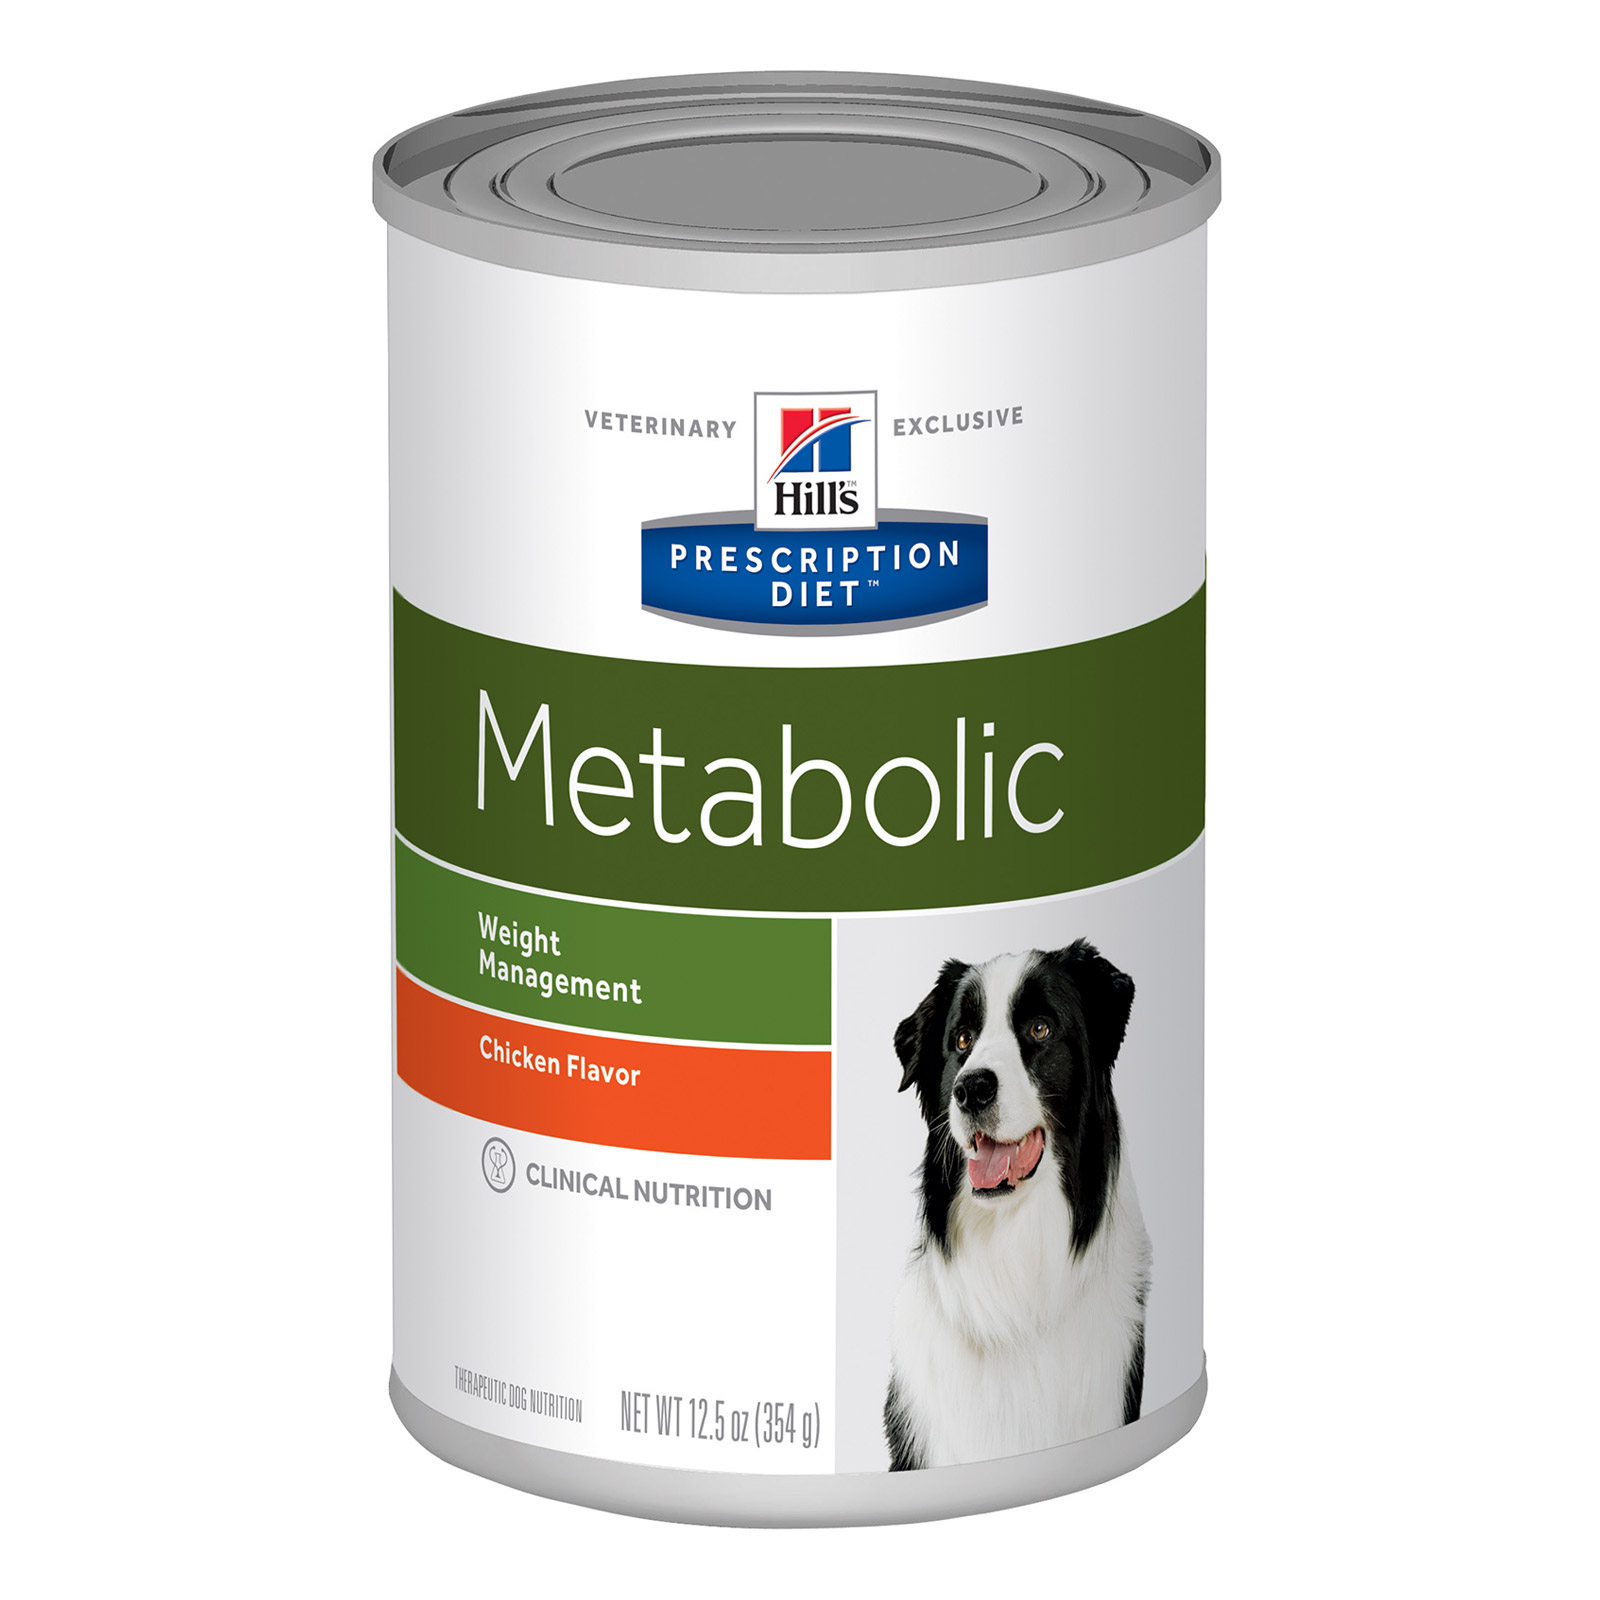 HILL'S PRESCRIPTION DIET METABOLIC WEIGHT MANAGEMENT WITH CHICKEN CANNED DOG FOOD for Food